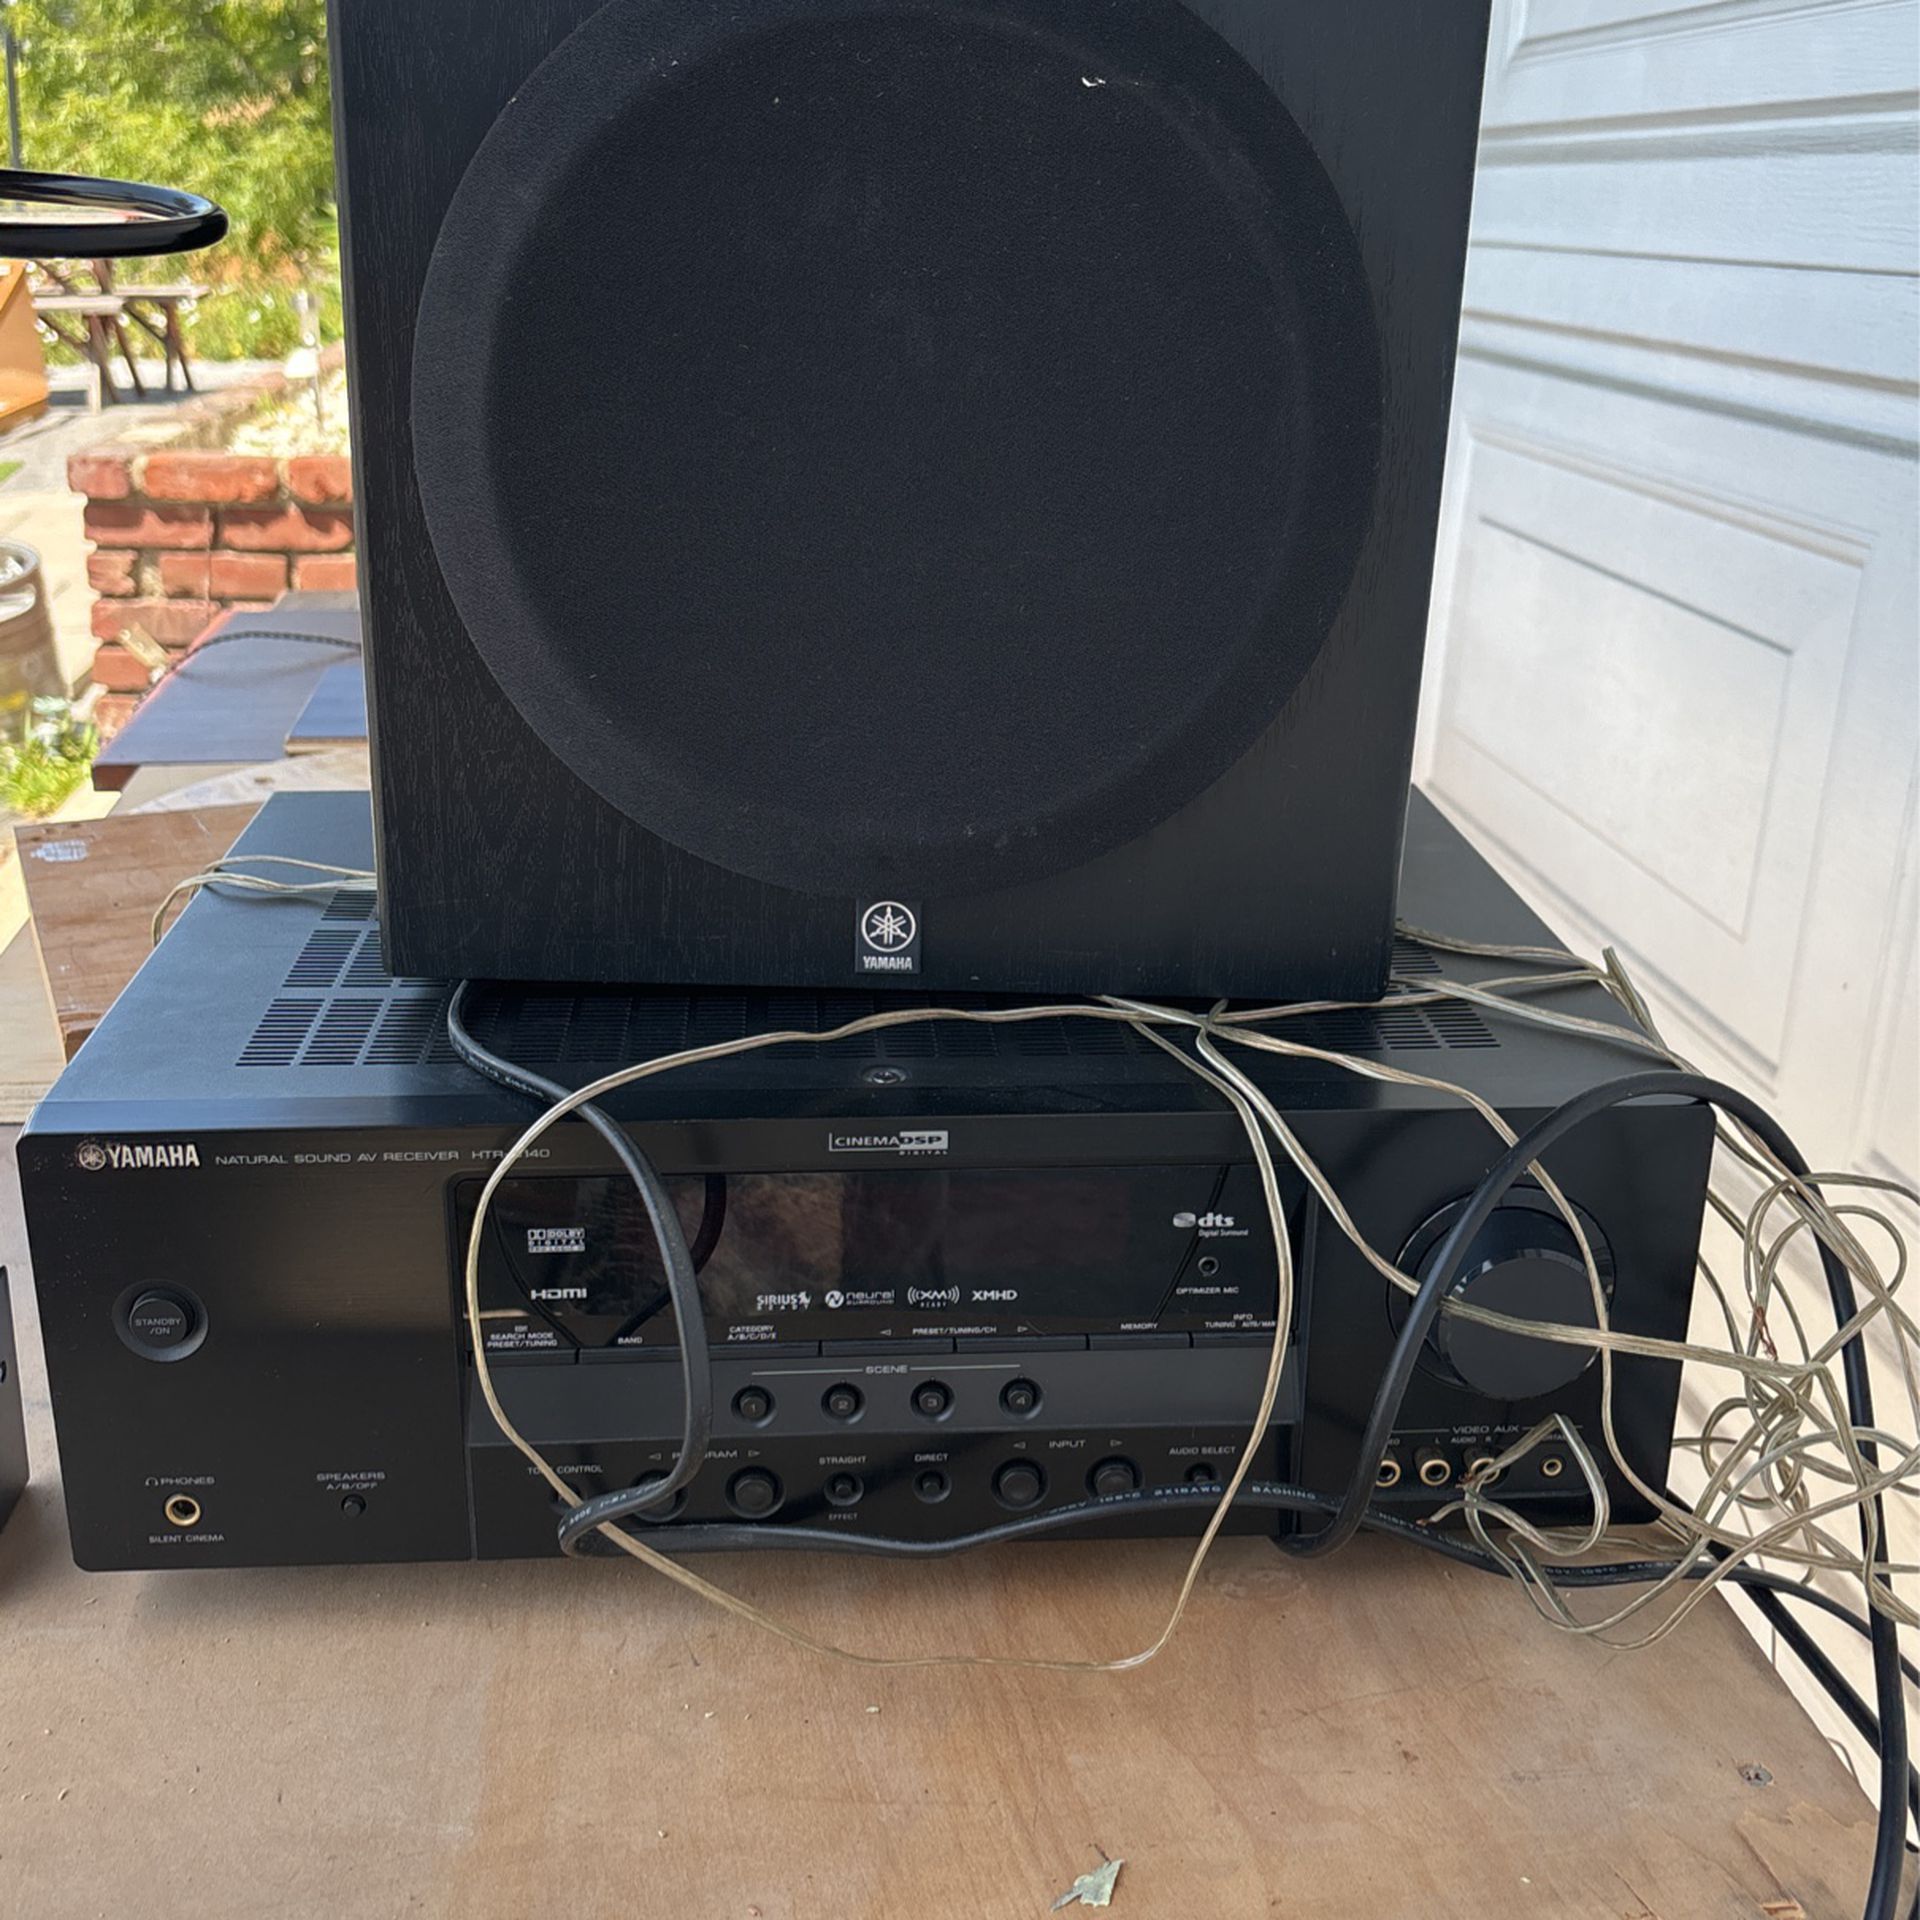 Yamaha System With Speakers